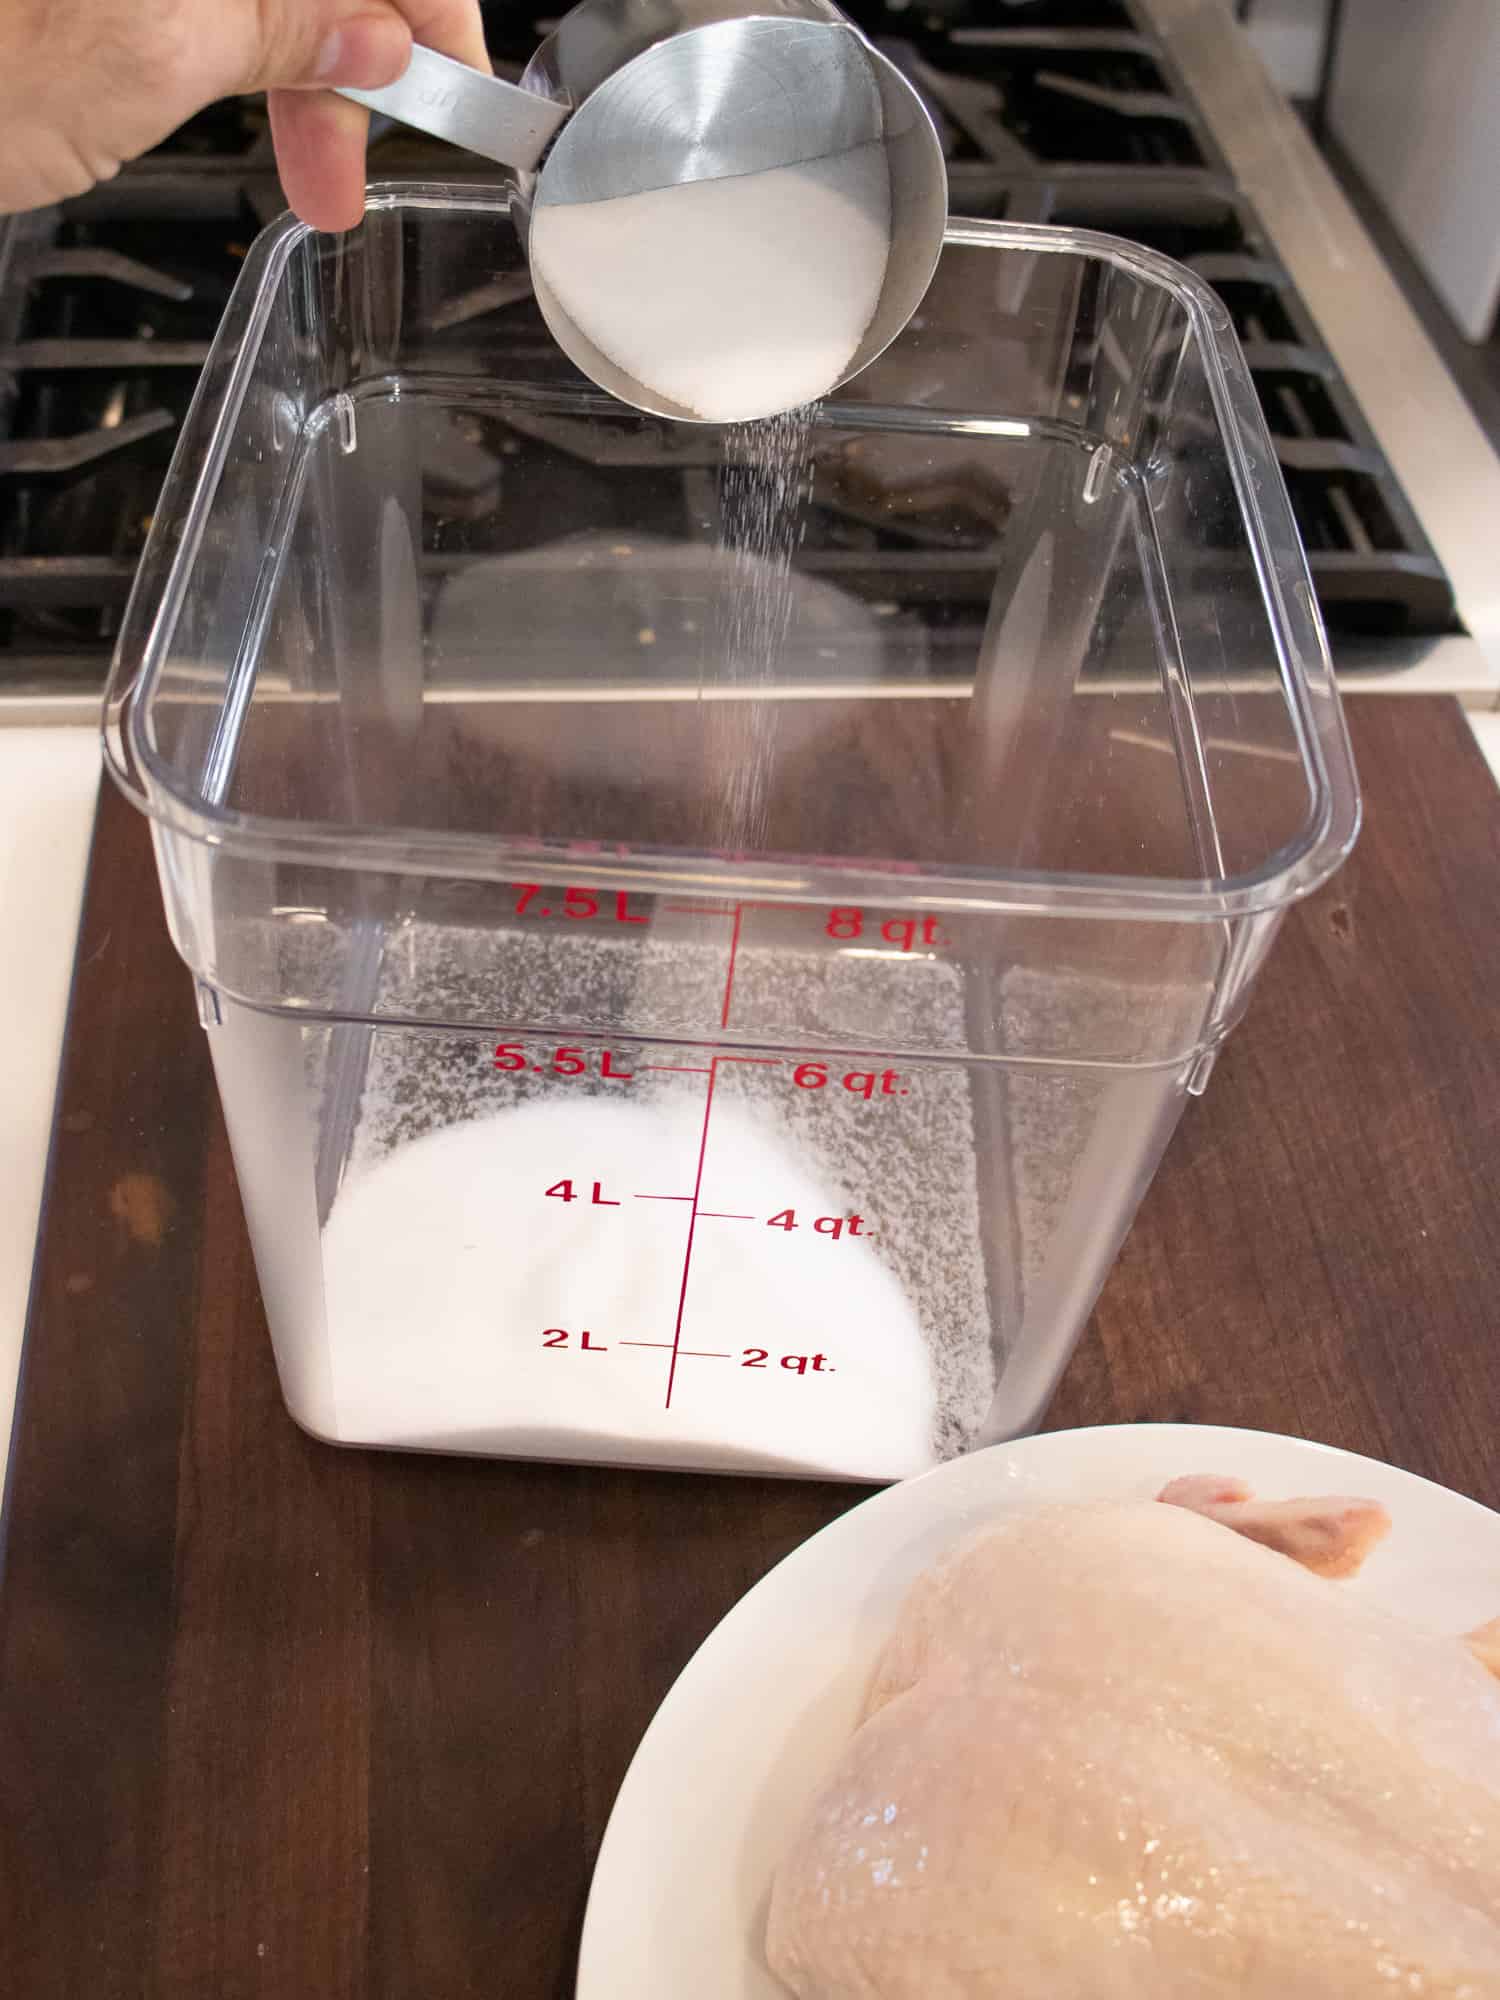 Easy instructions to make a simple brine for a whole chicken including how long to brine and what ingredients to use like salt, sugar, pepper and more.